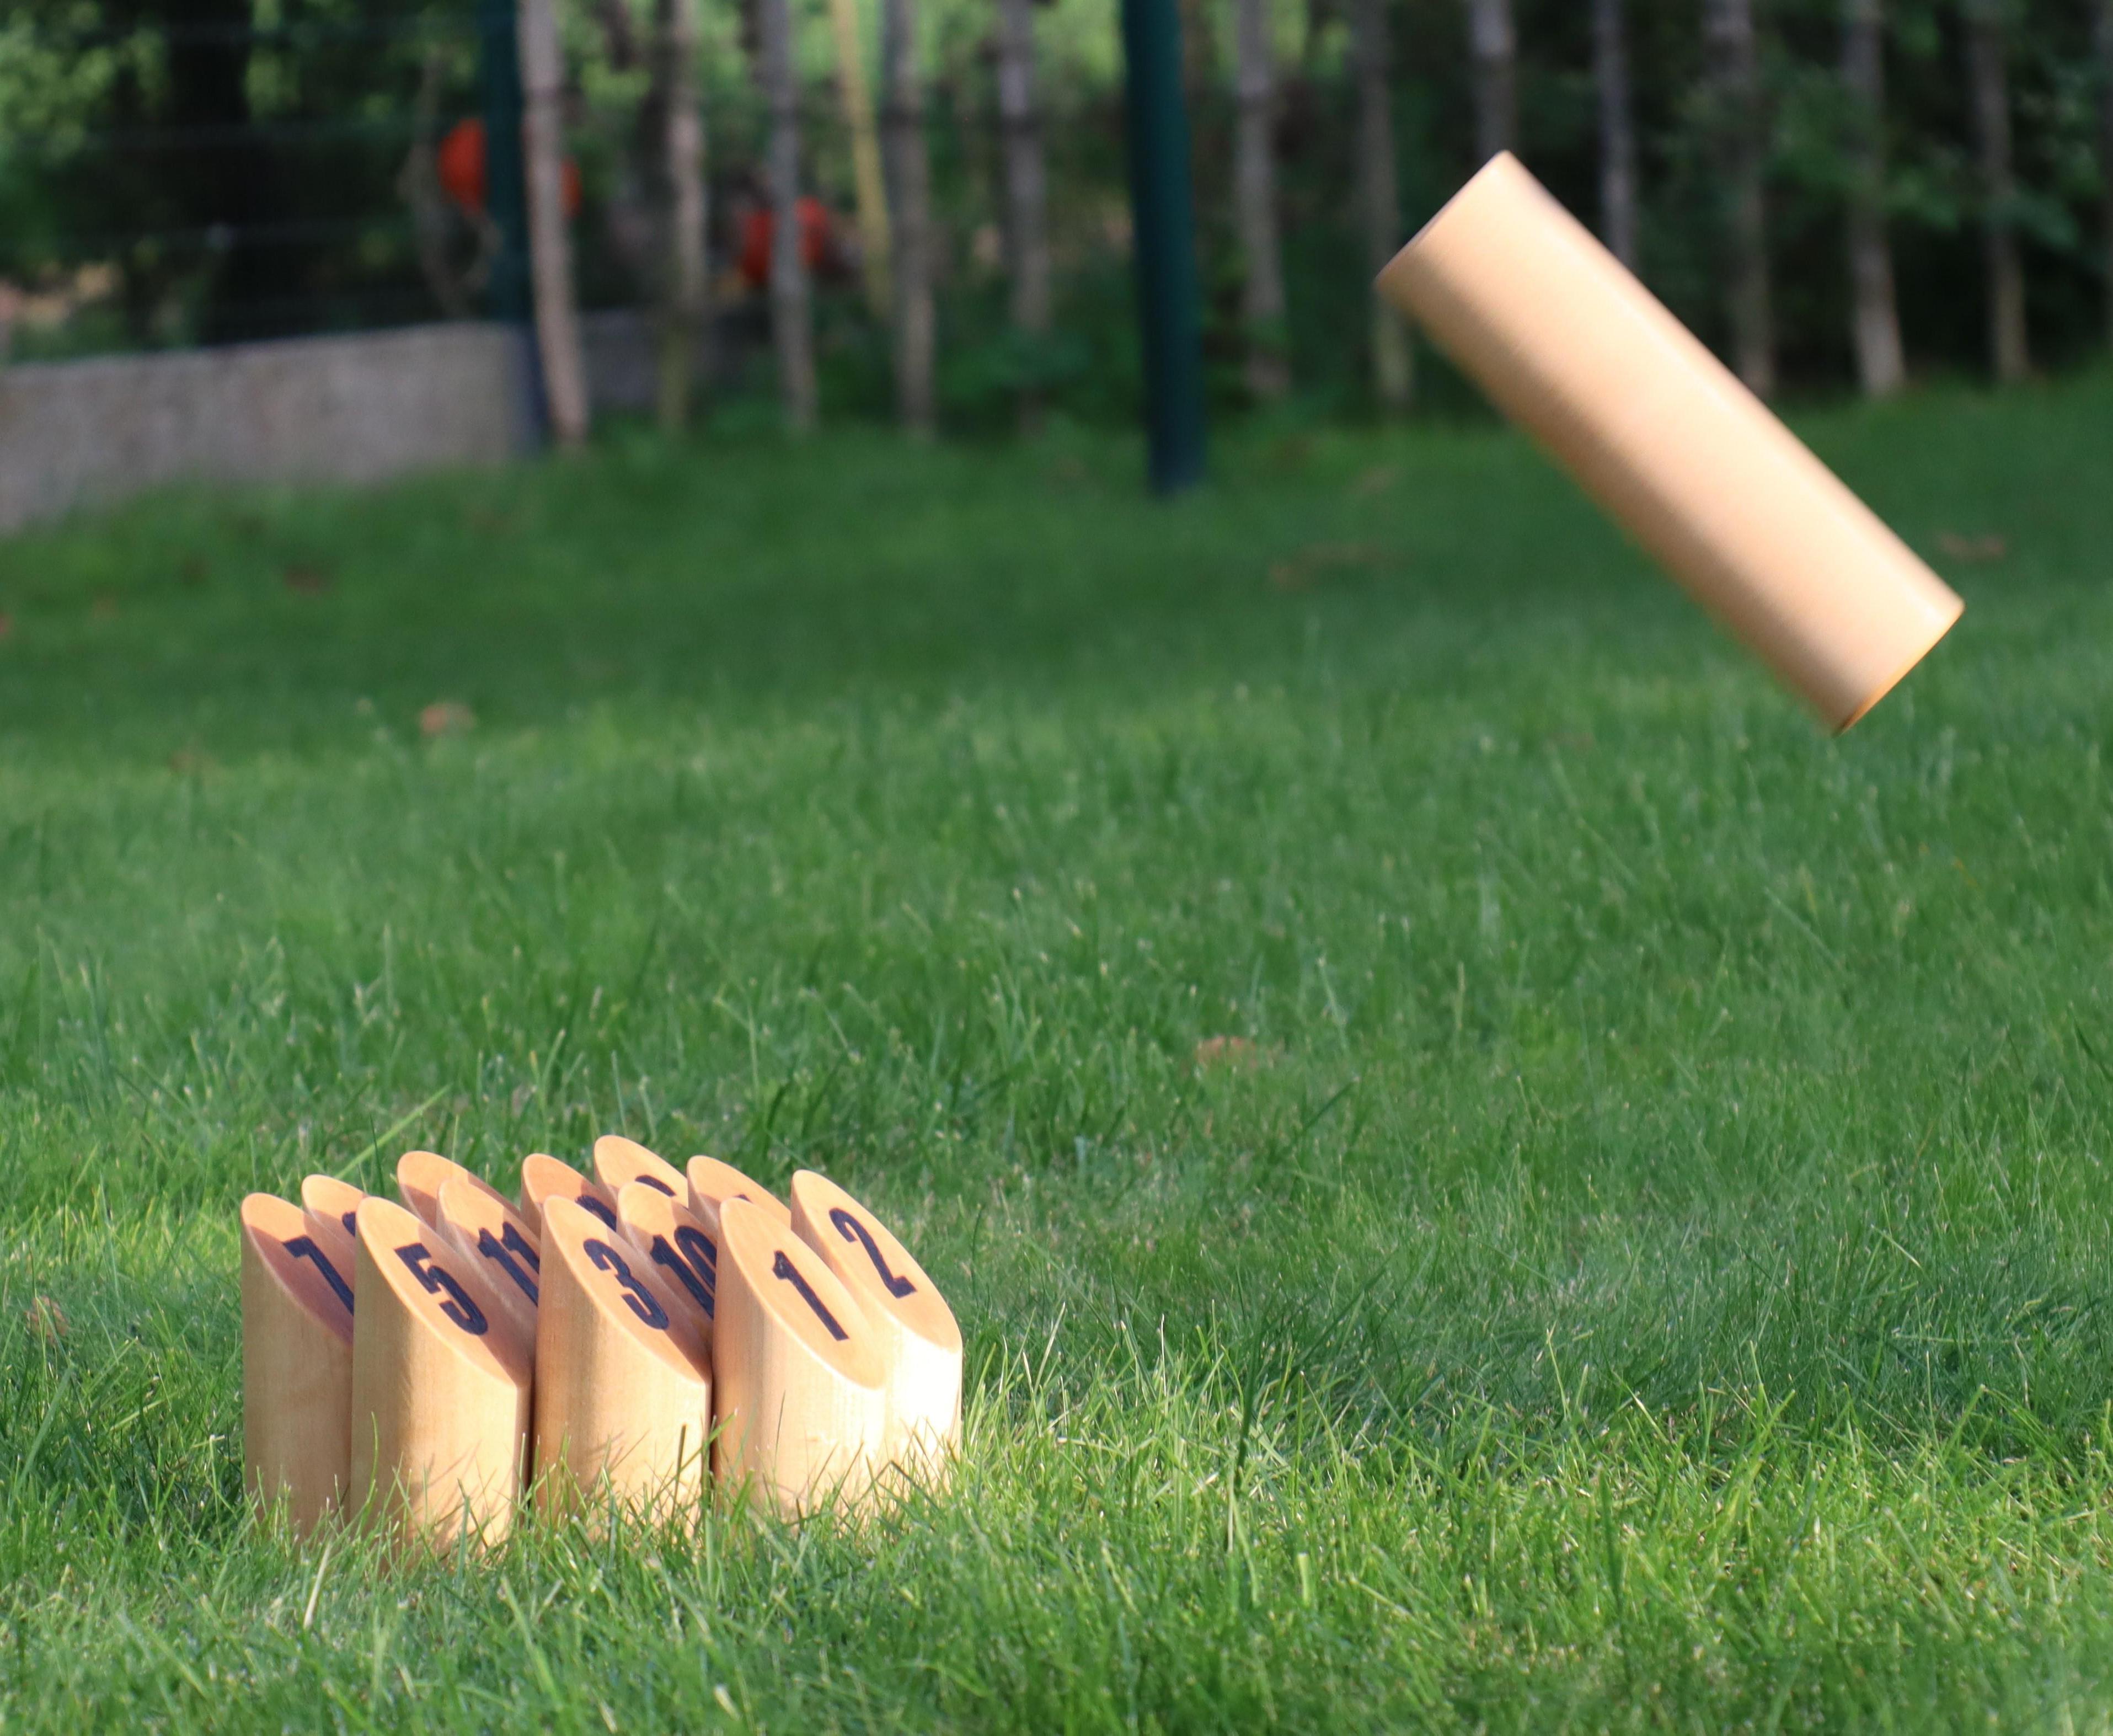 Mölkky, a Throwing Game (no Power Tools)